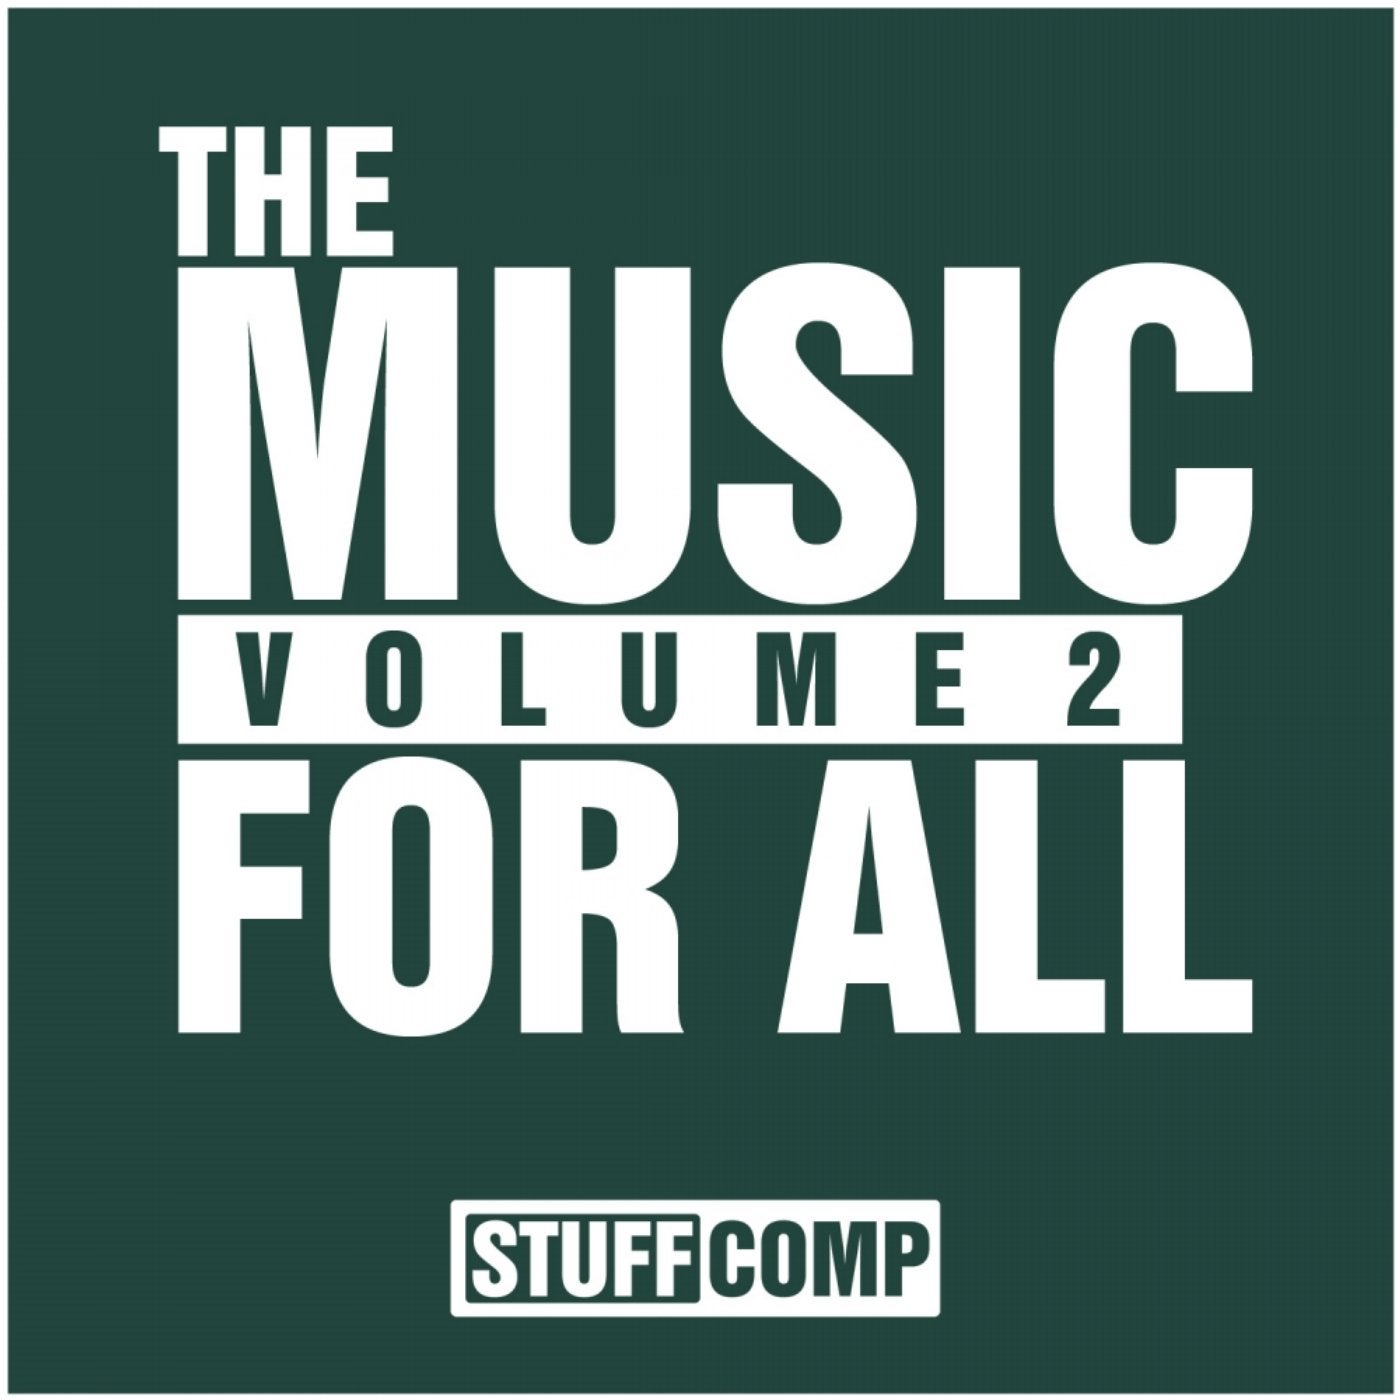 Music For All, Vol. 2